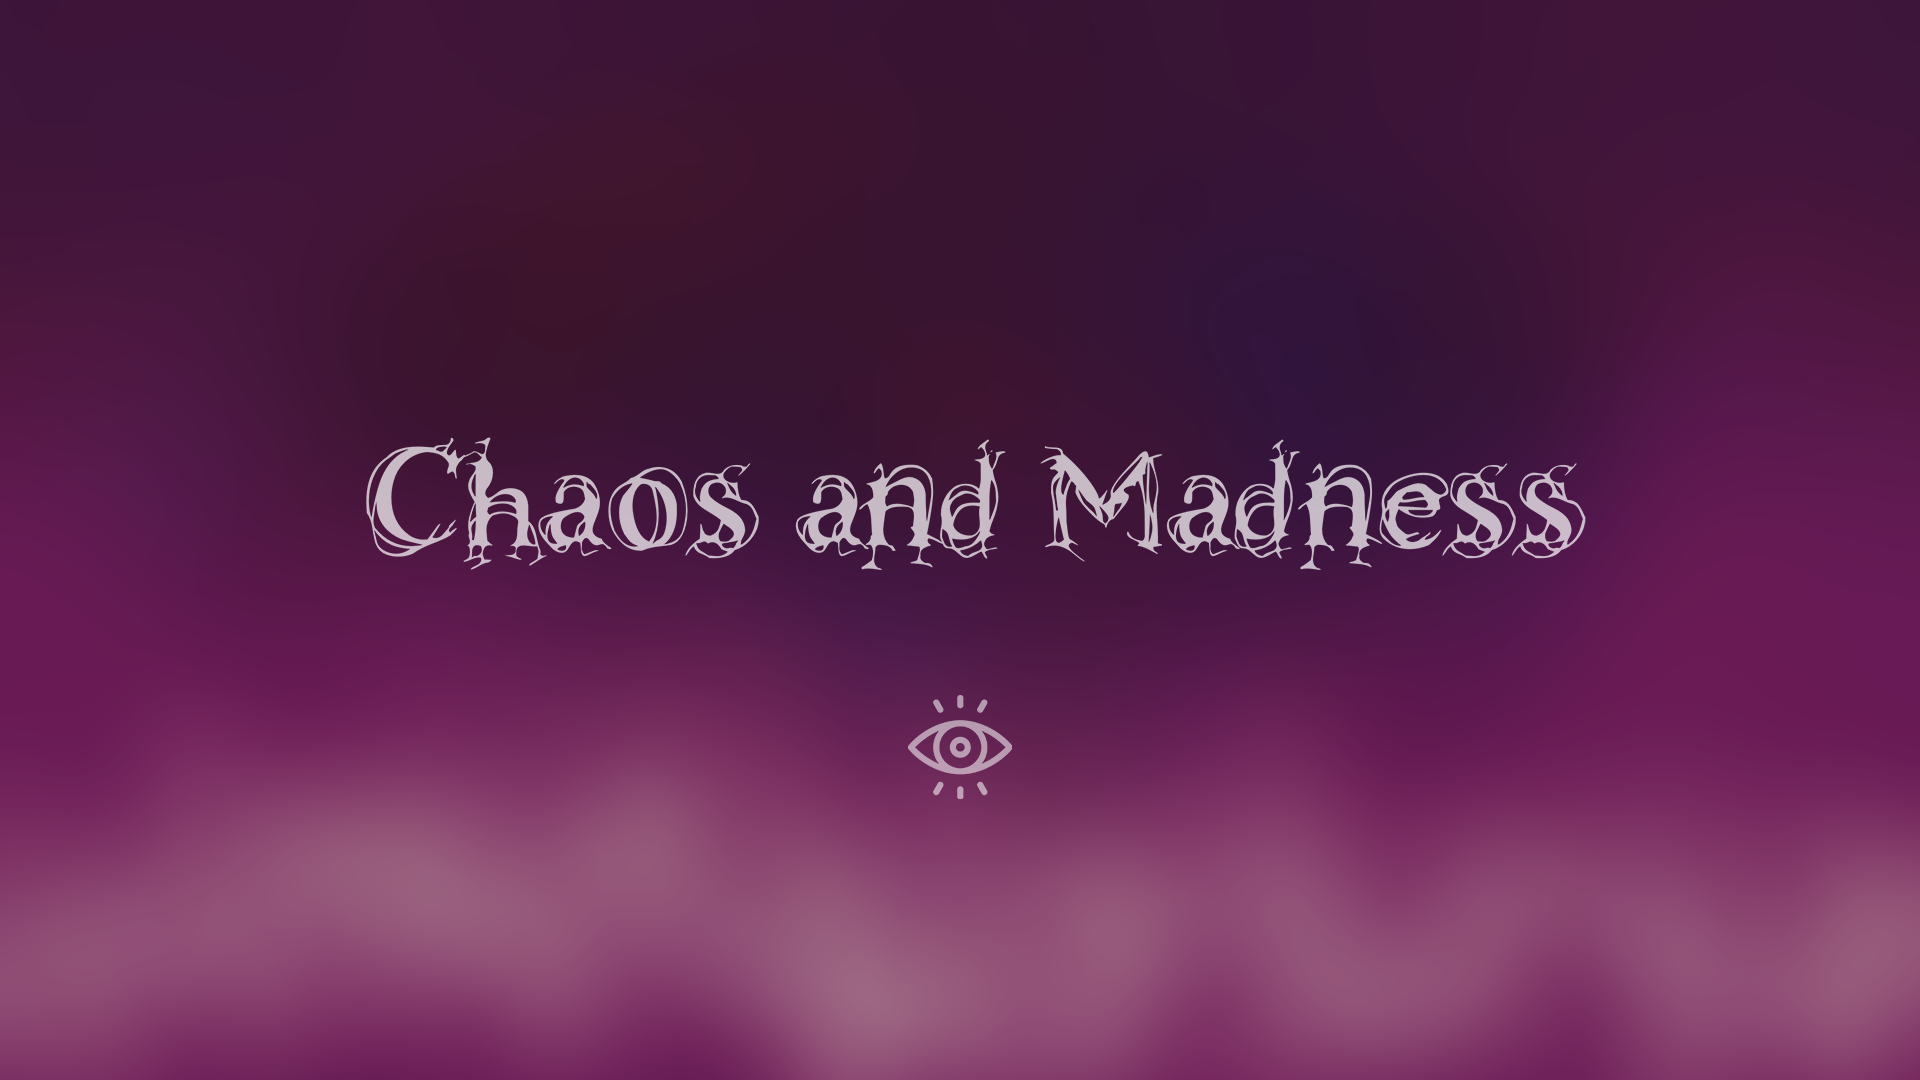 Chaos and Madness